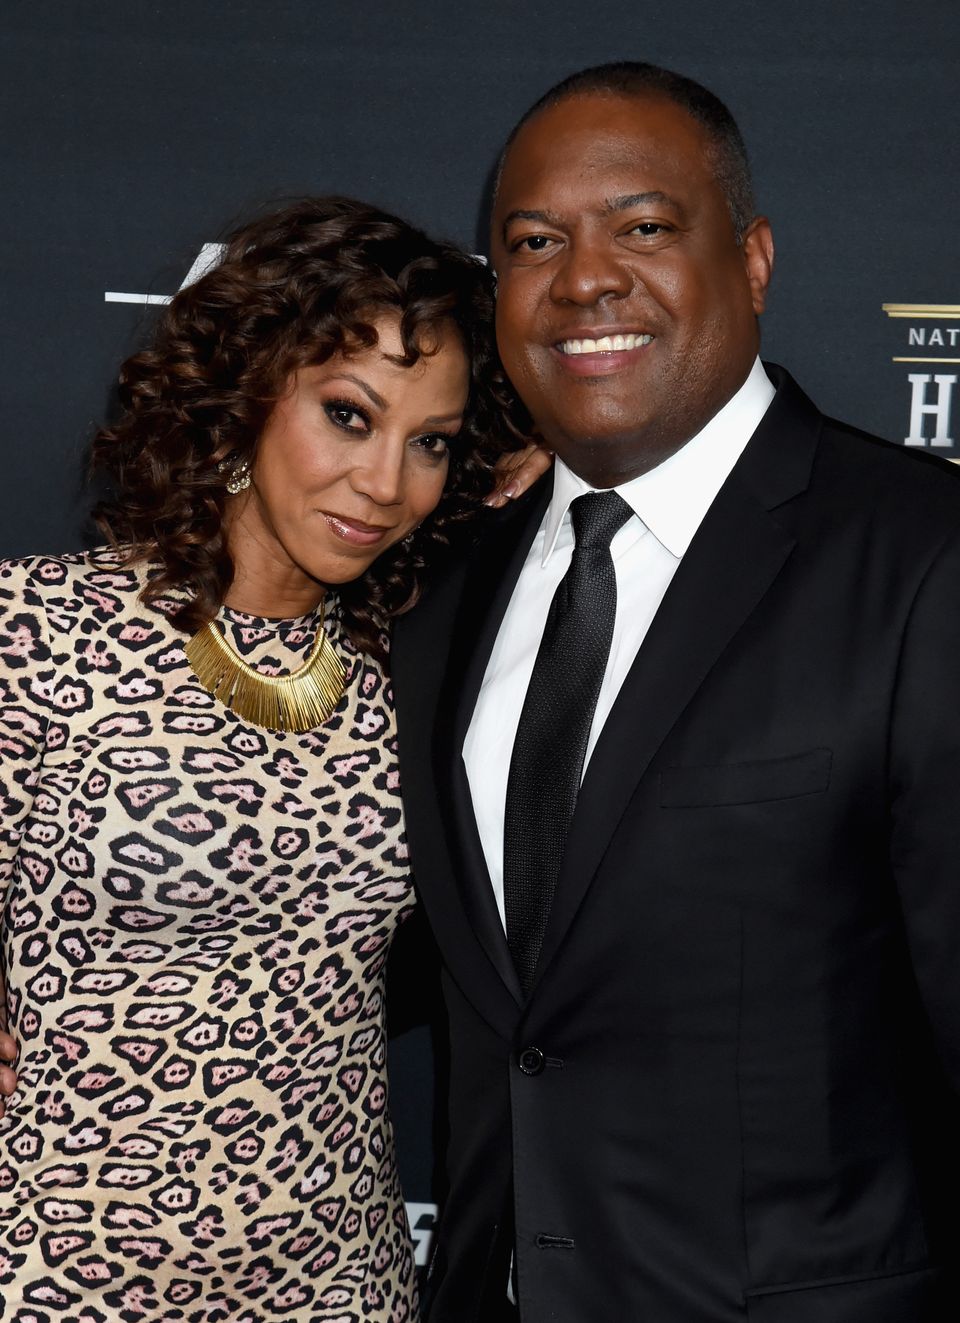 21 Famous Couples Who Exemplify The Beauty Of Black Love | HuffPost Voices